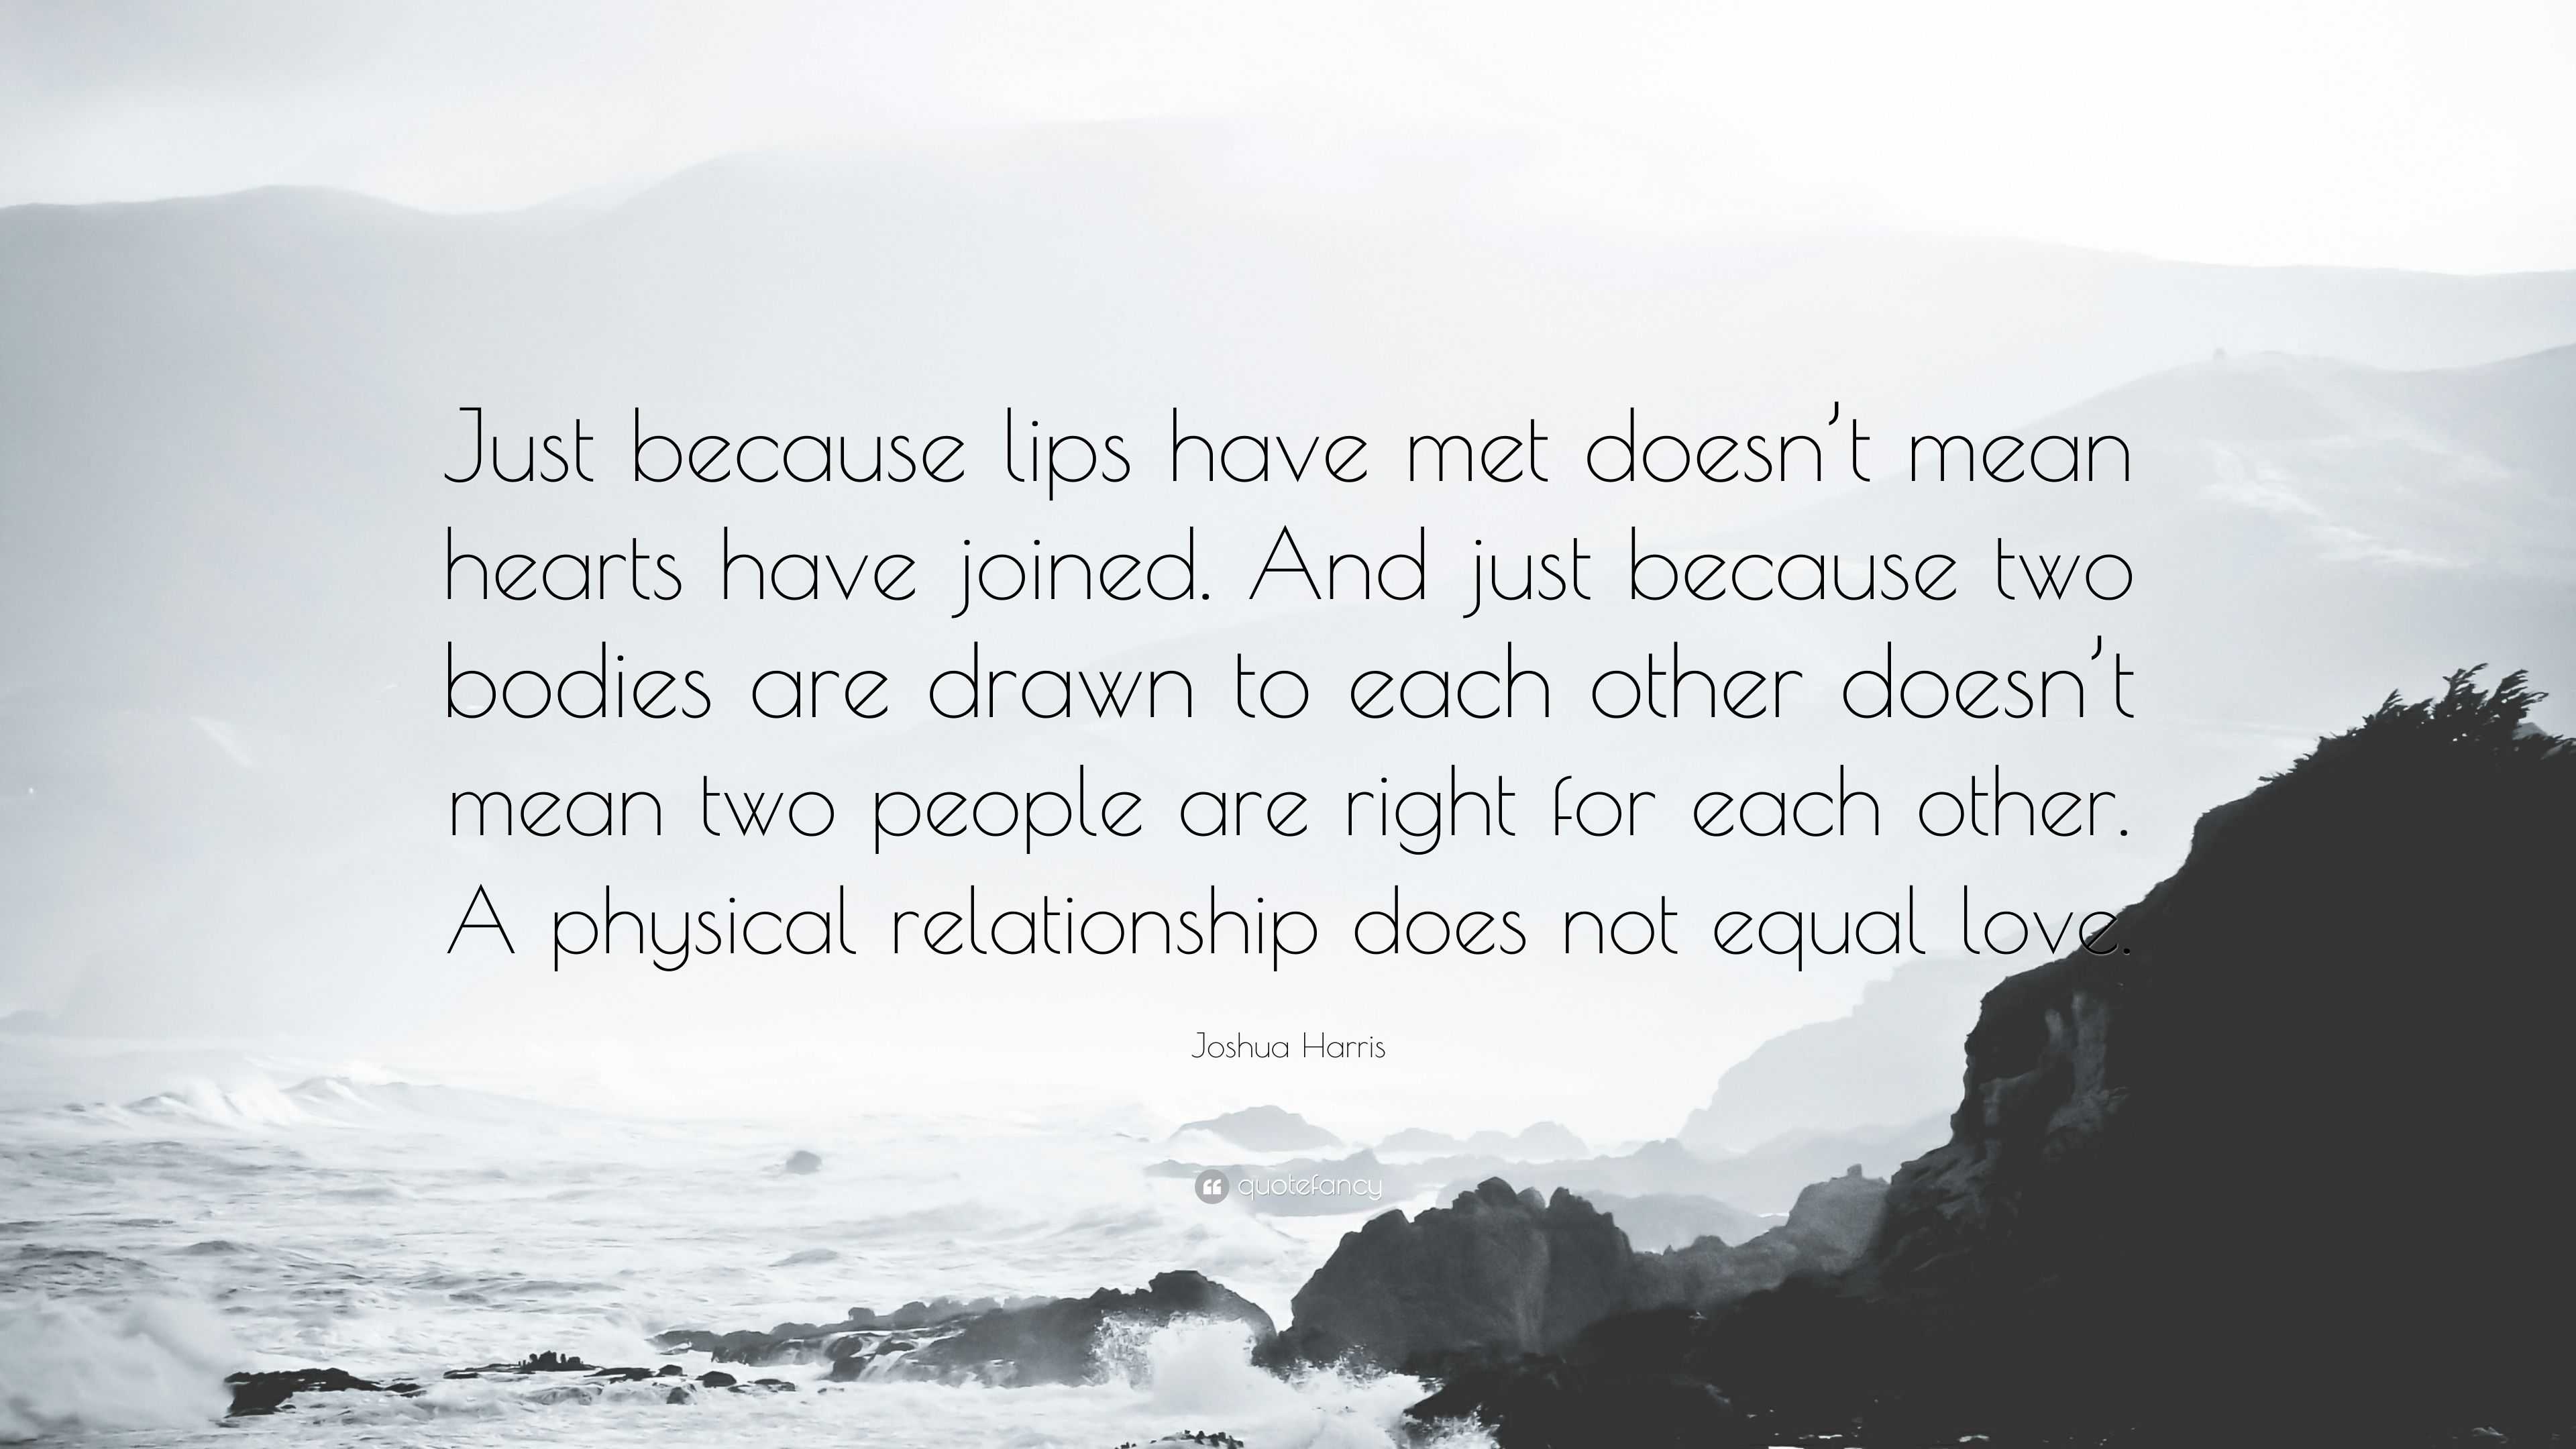 Joshua Harris Quote: “Just because lips have met doesn't mean